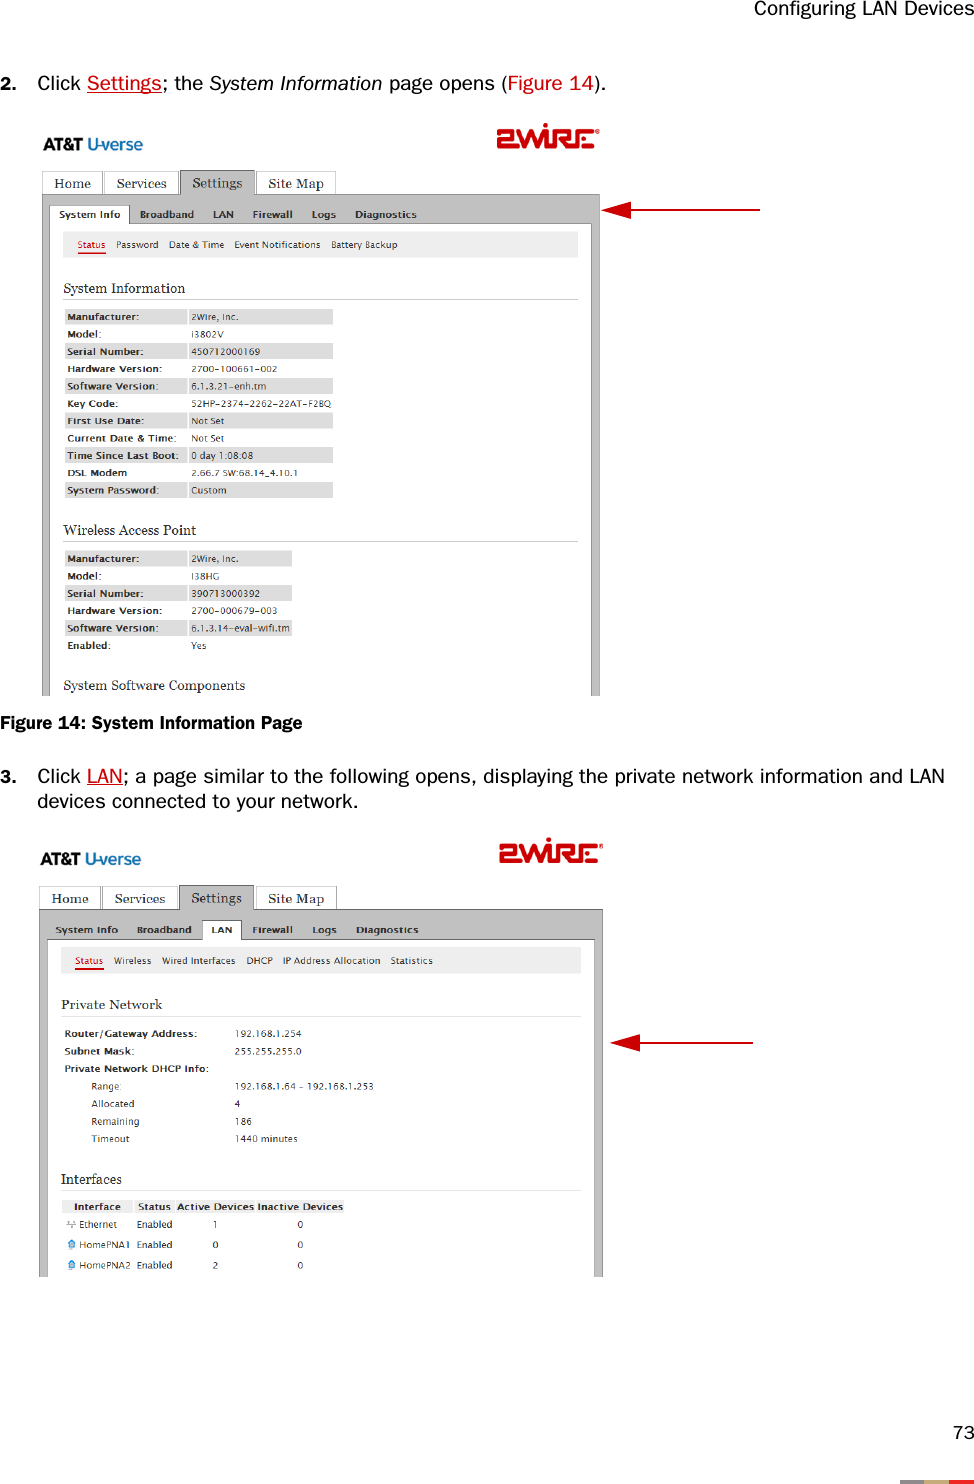 Configuring LAN Devices732. Click Settings; the System Information page opens (Figure 14).Figure 14: System Information Page 3. Click LAN; a page similar to the following opens, displaying the private network information and LAN devices connected to your network. 